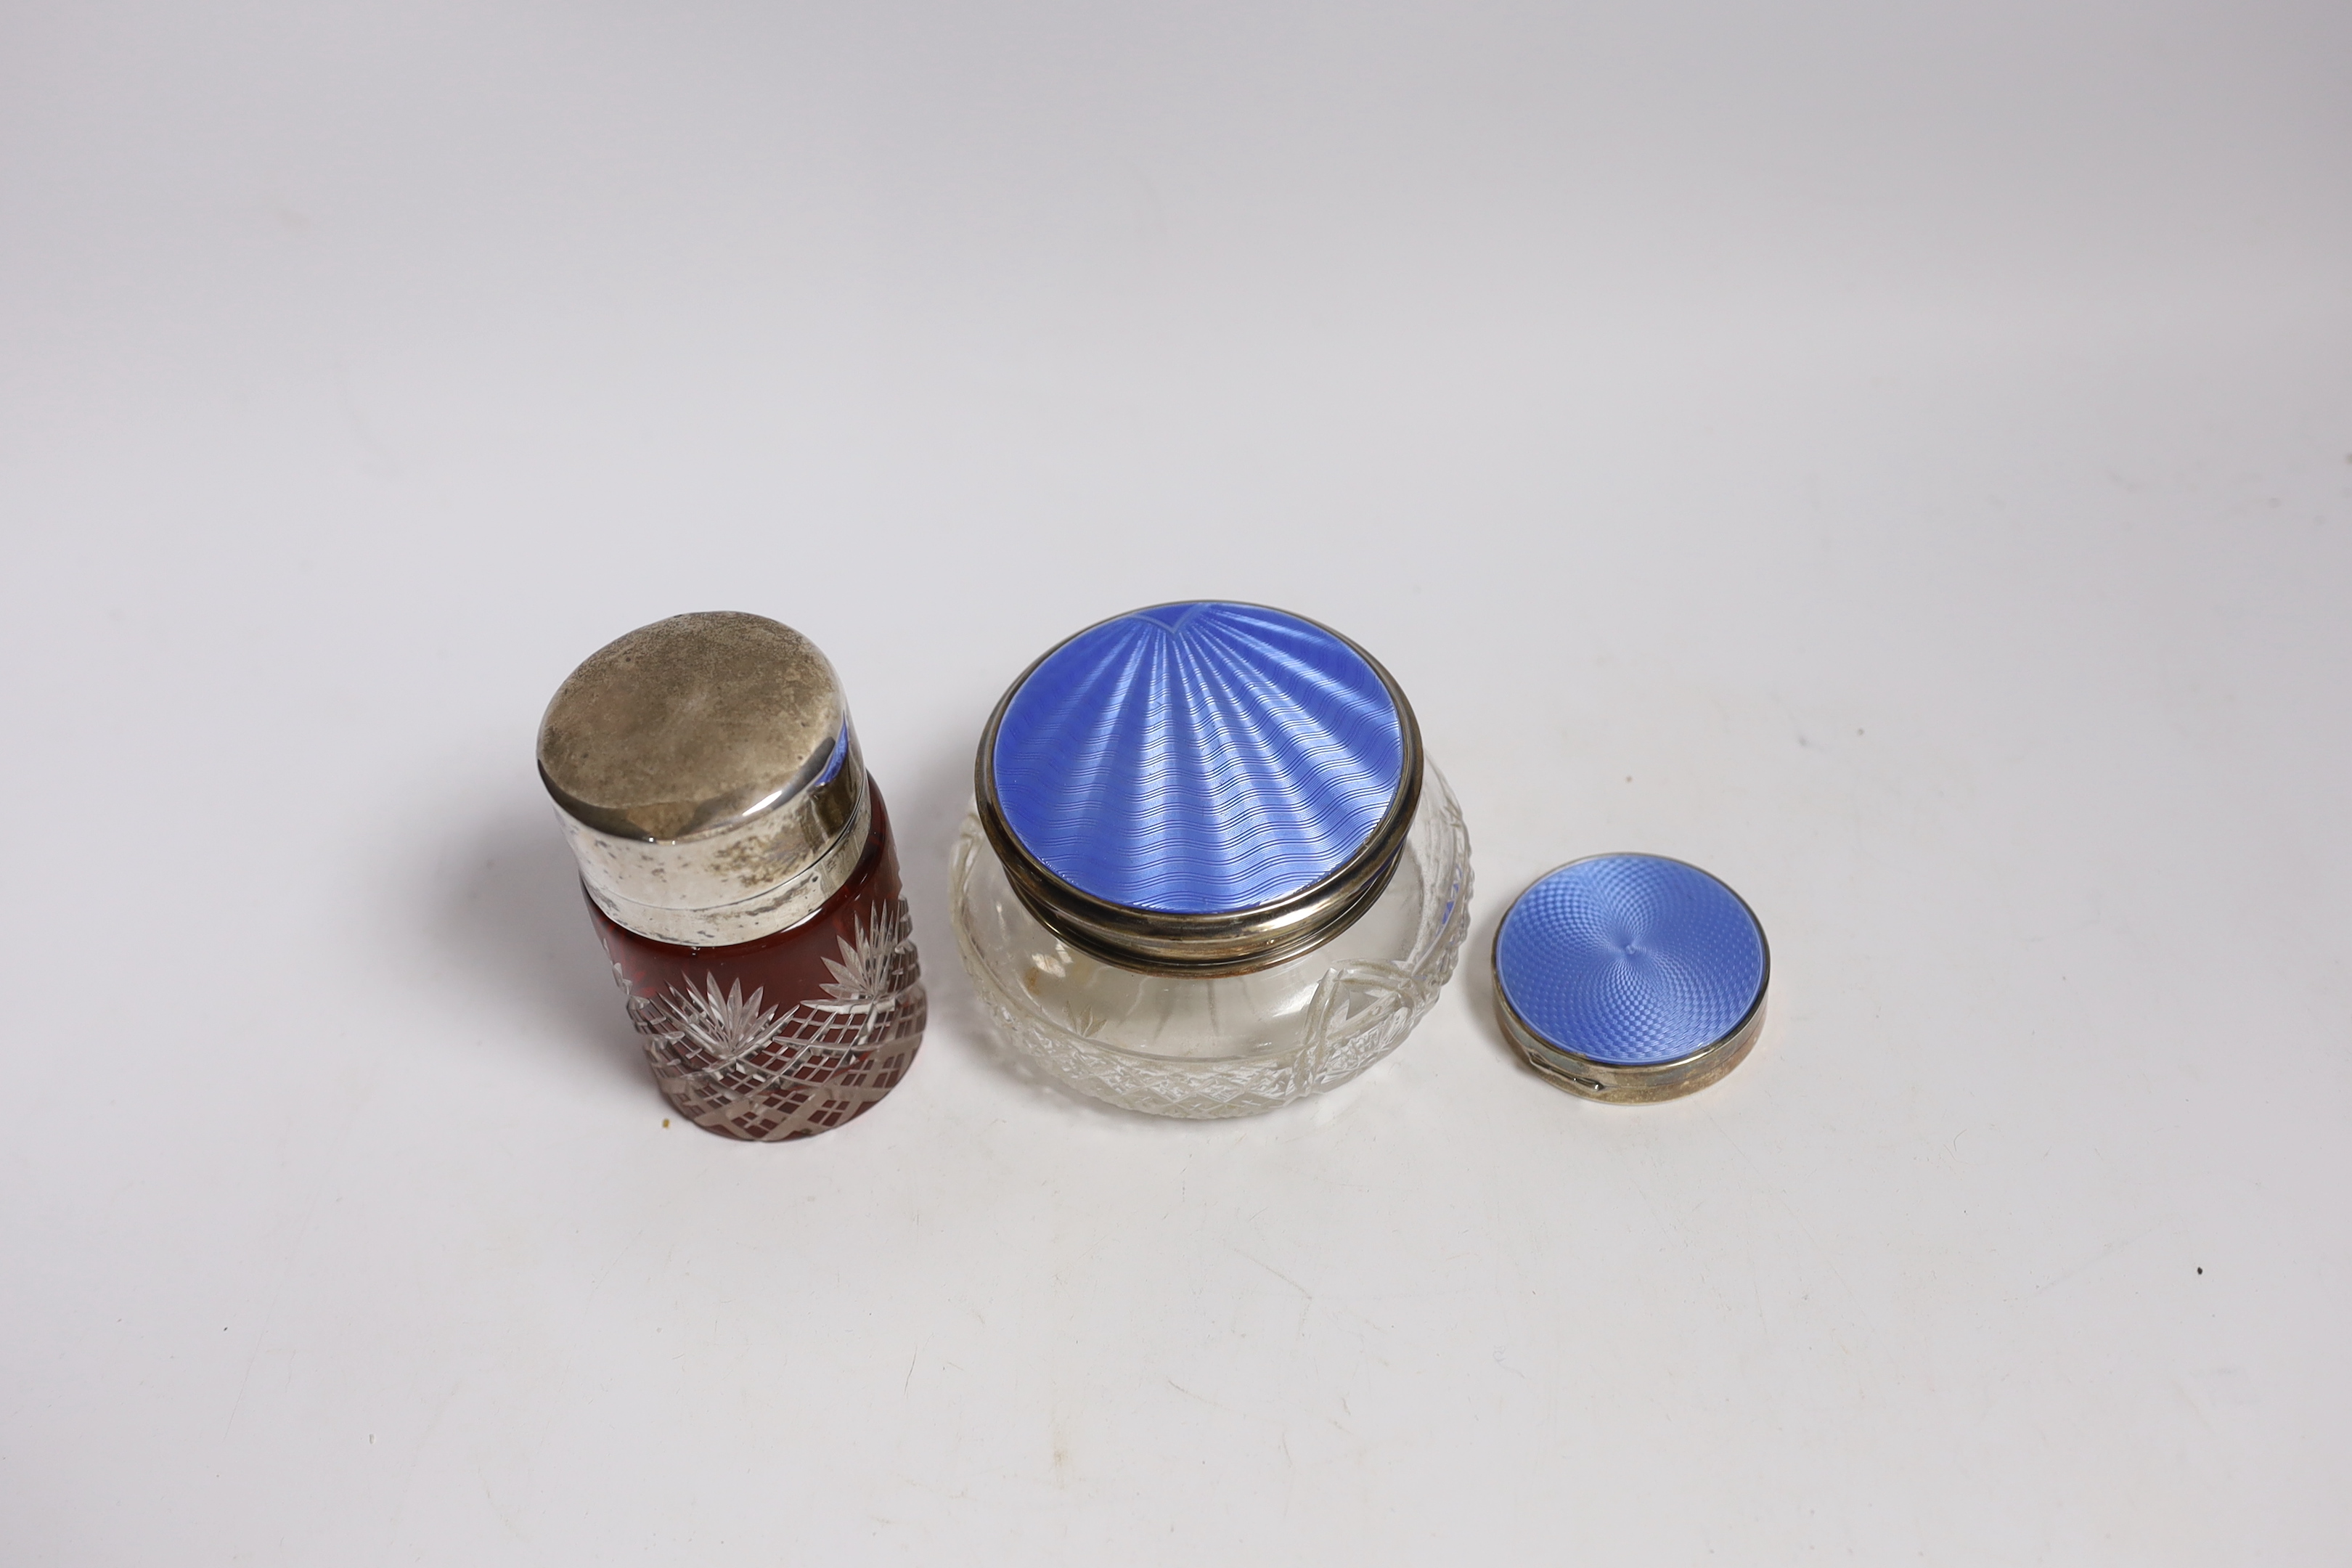 A silver and enamel compact, a silver and enamel mounted glass jar and an Edwardian silver mounted cut glass salts jar by William Hutton & Sons, Birmingham, 1904, 85mm.